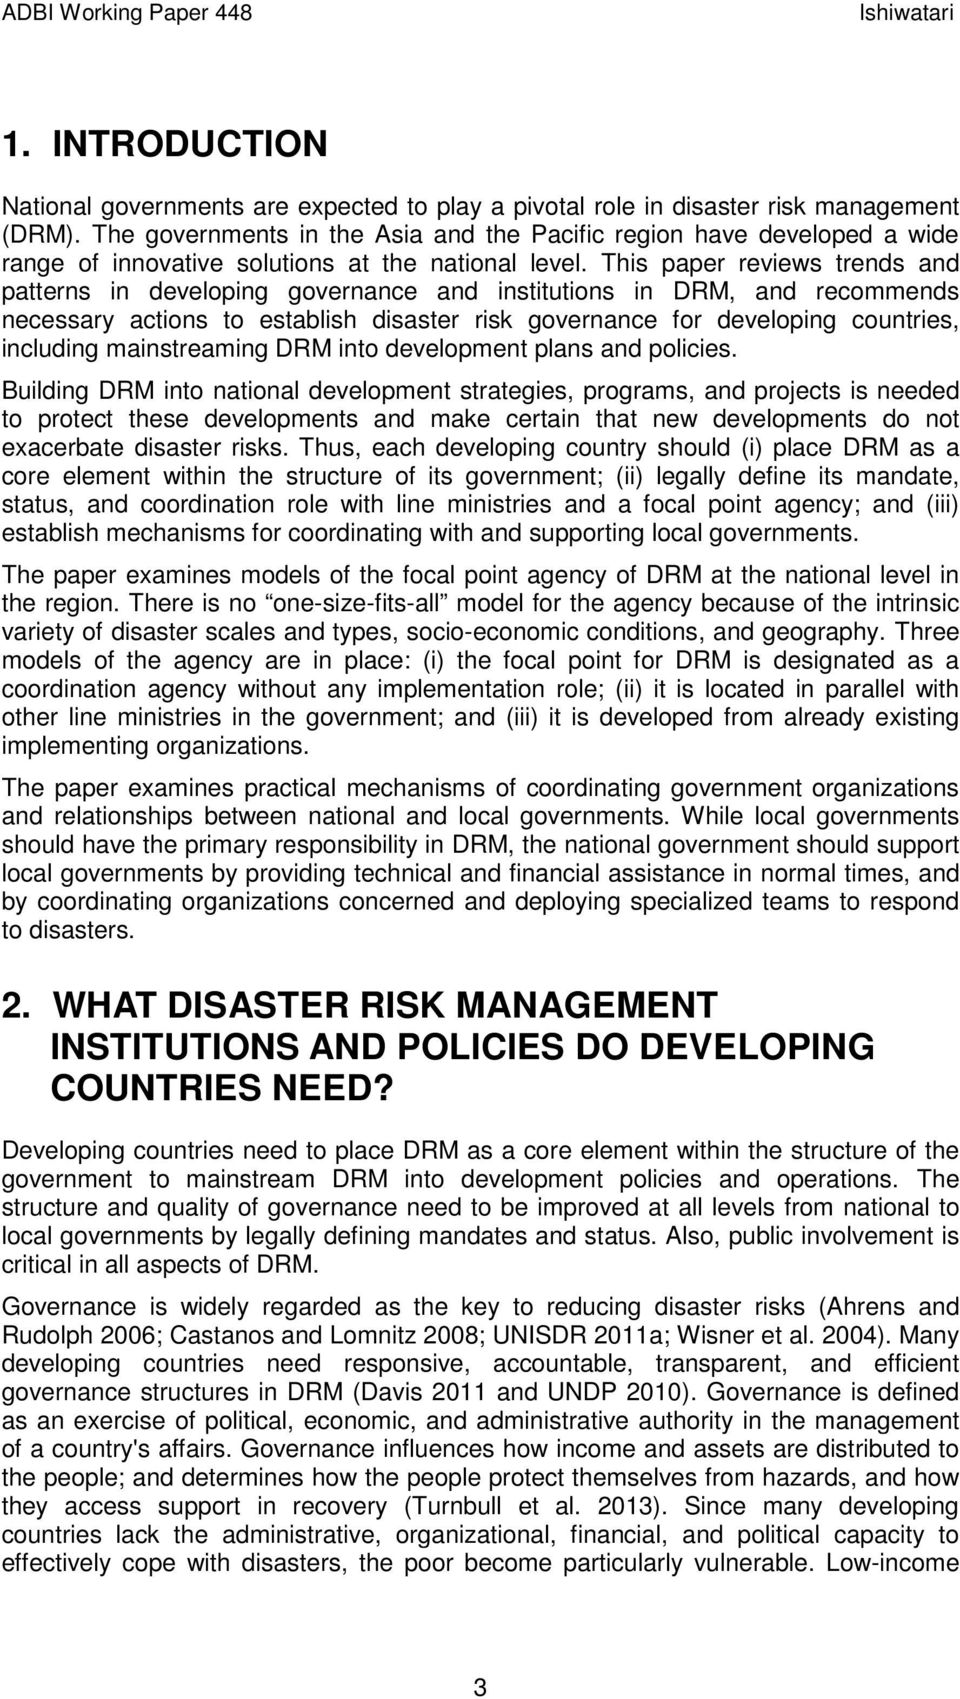 This paper reviews trends and patterns in developing governance and institutions in DRM, and recommends necessary actions to establish disaster risk governance for developing countries, including